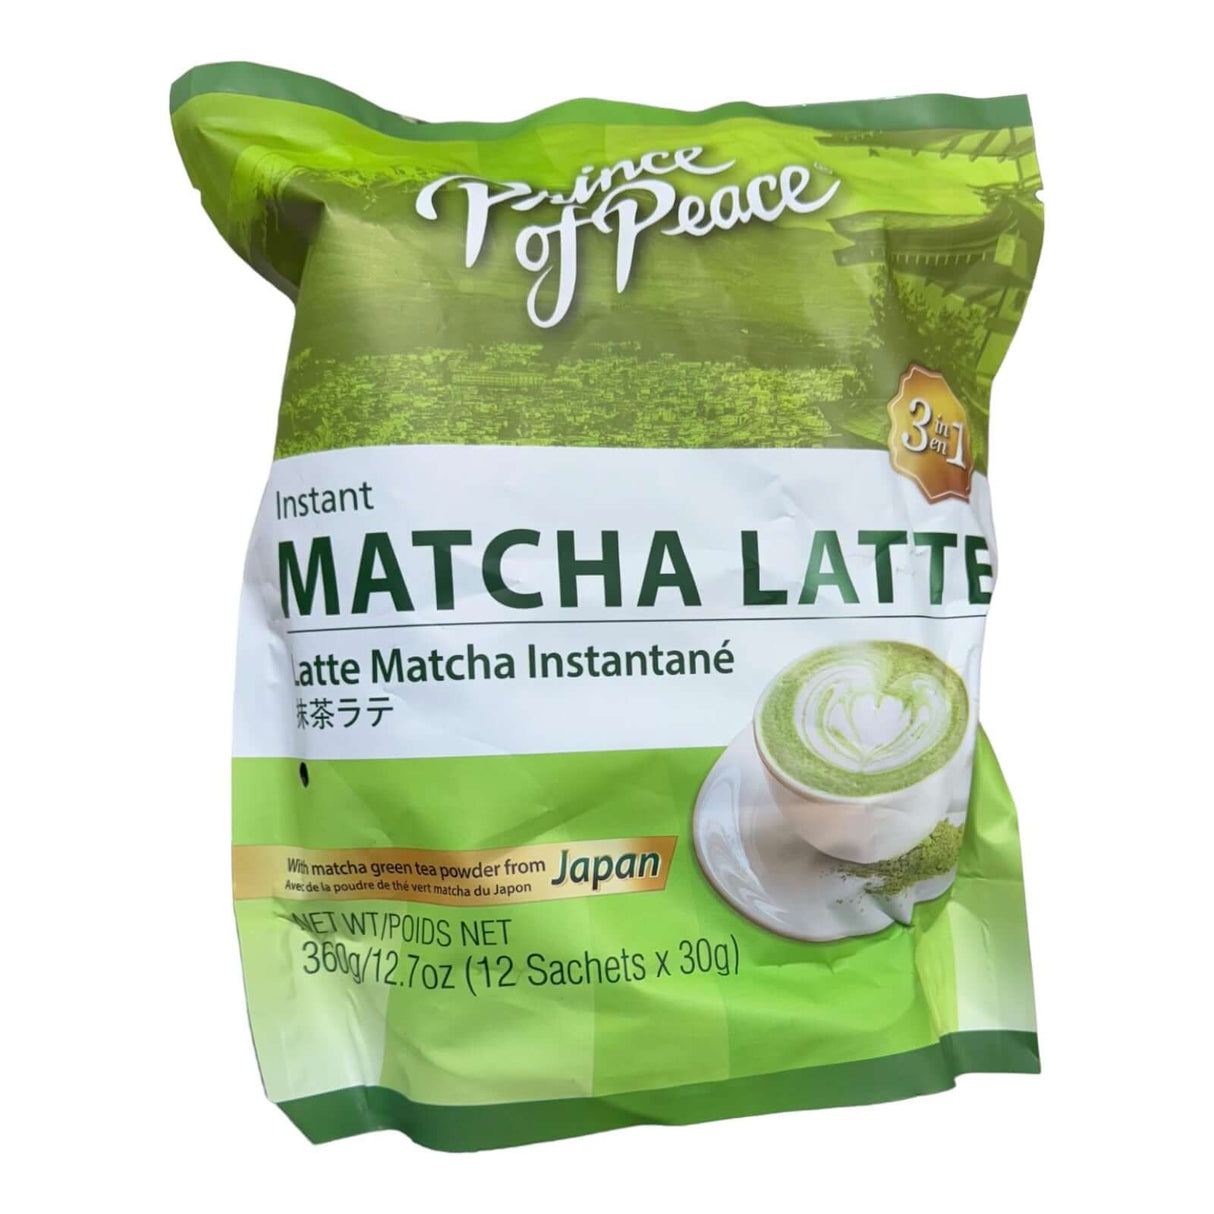 Prince of Peace Instant Macha Latte